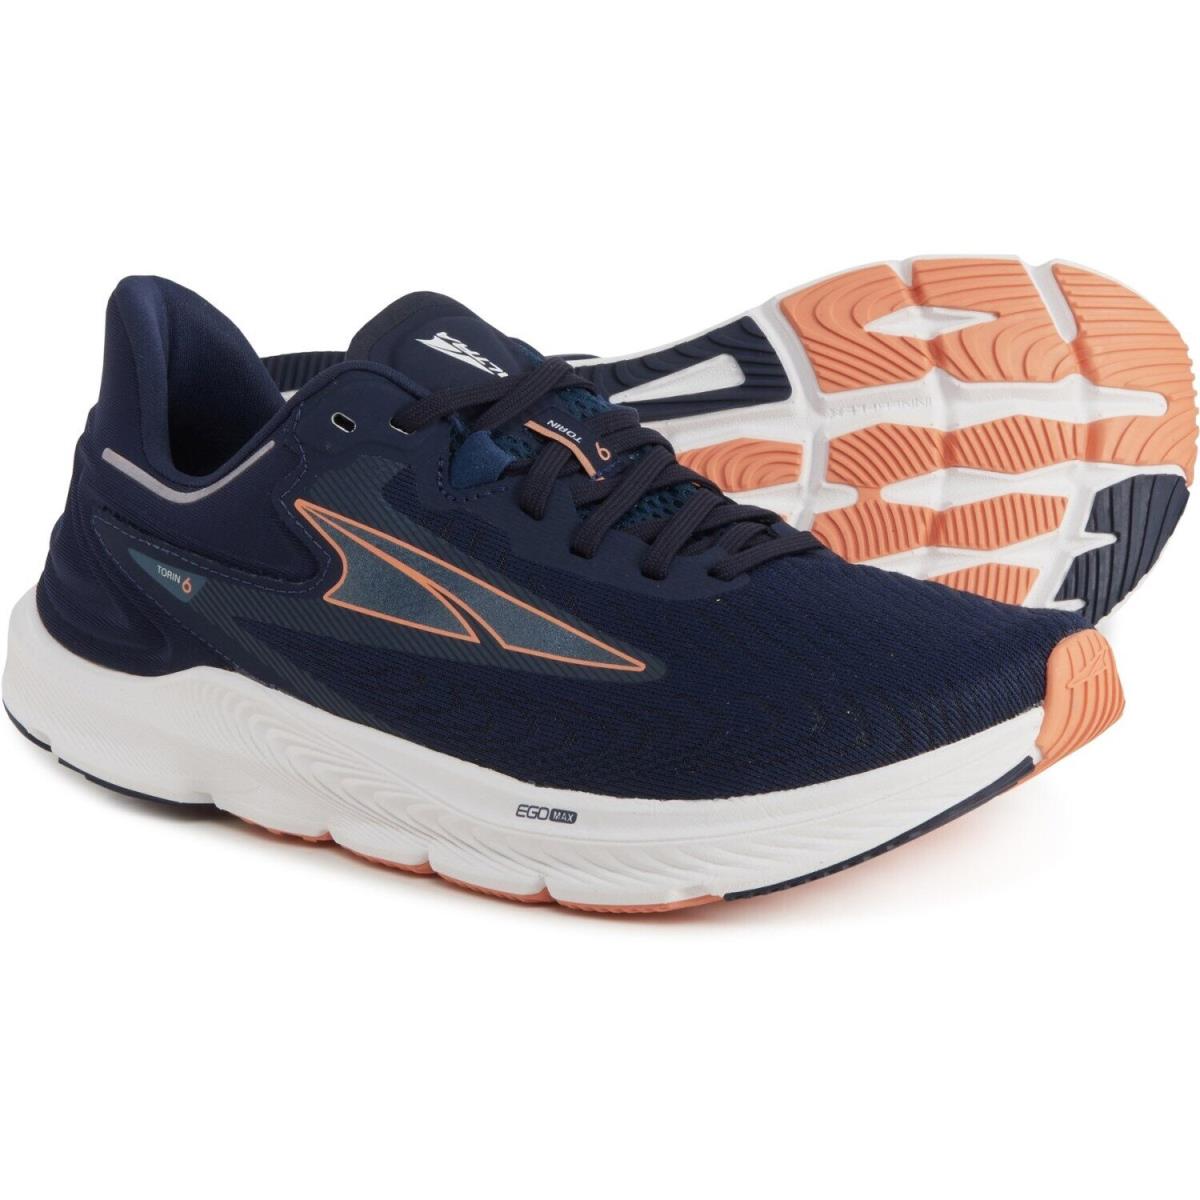 Altra Torin 6 Running Shoes Women`s Size 8.5 B Navy/coral AL0A7R78447 - Navy/Coral